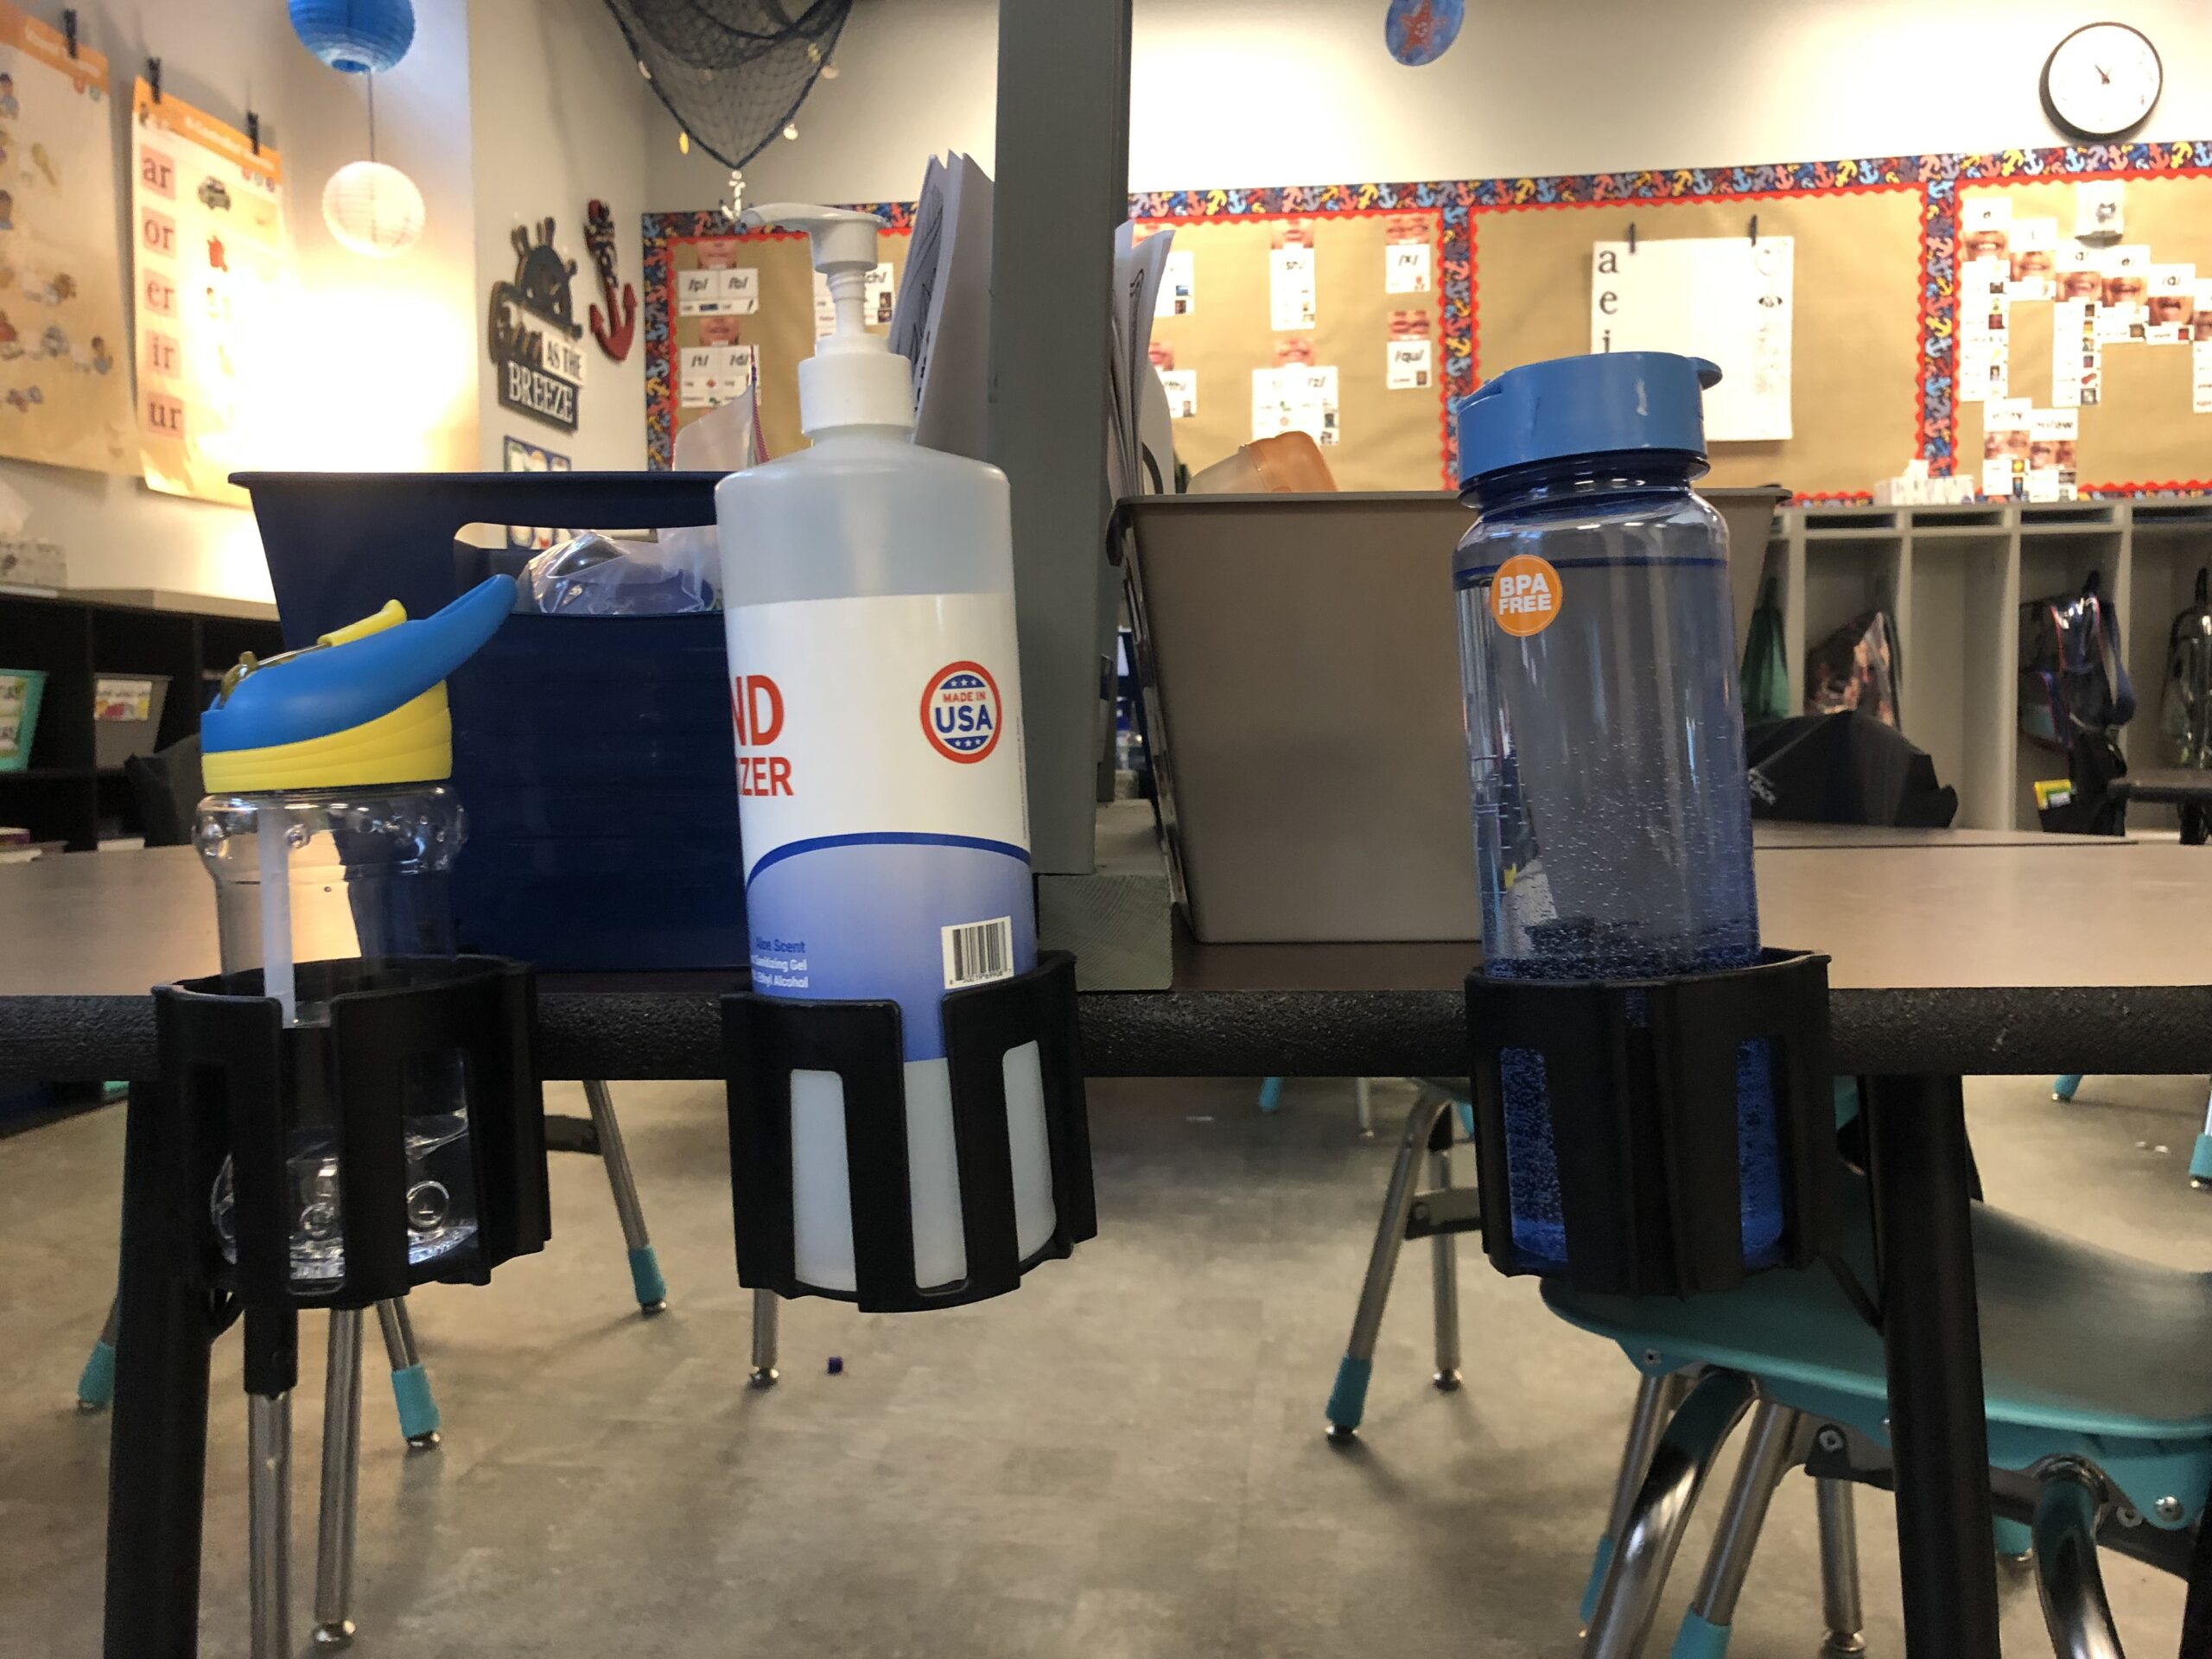 Water bottle holders for student desks include these cup holster bottle holders attached to aclassroom desk, holding water bottle and cleaning wipes 